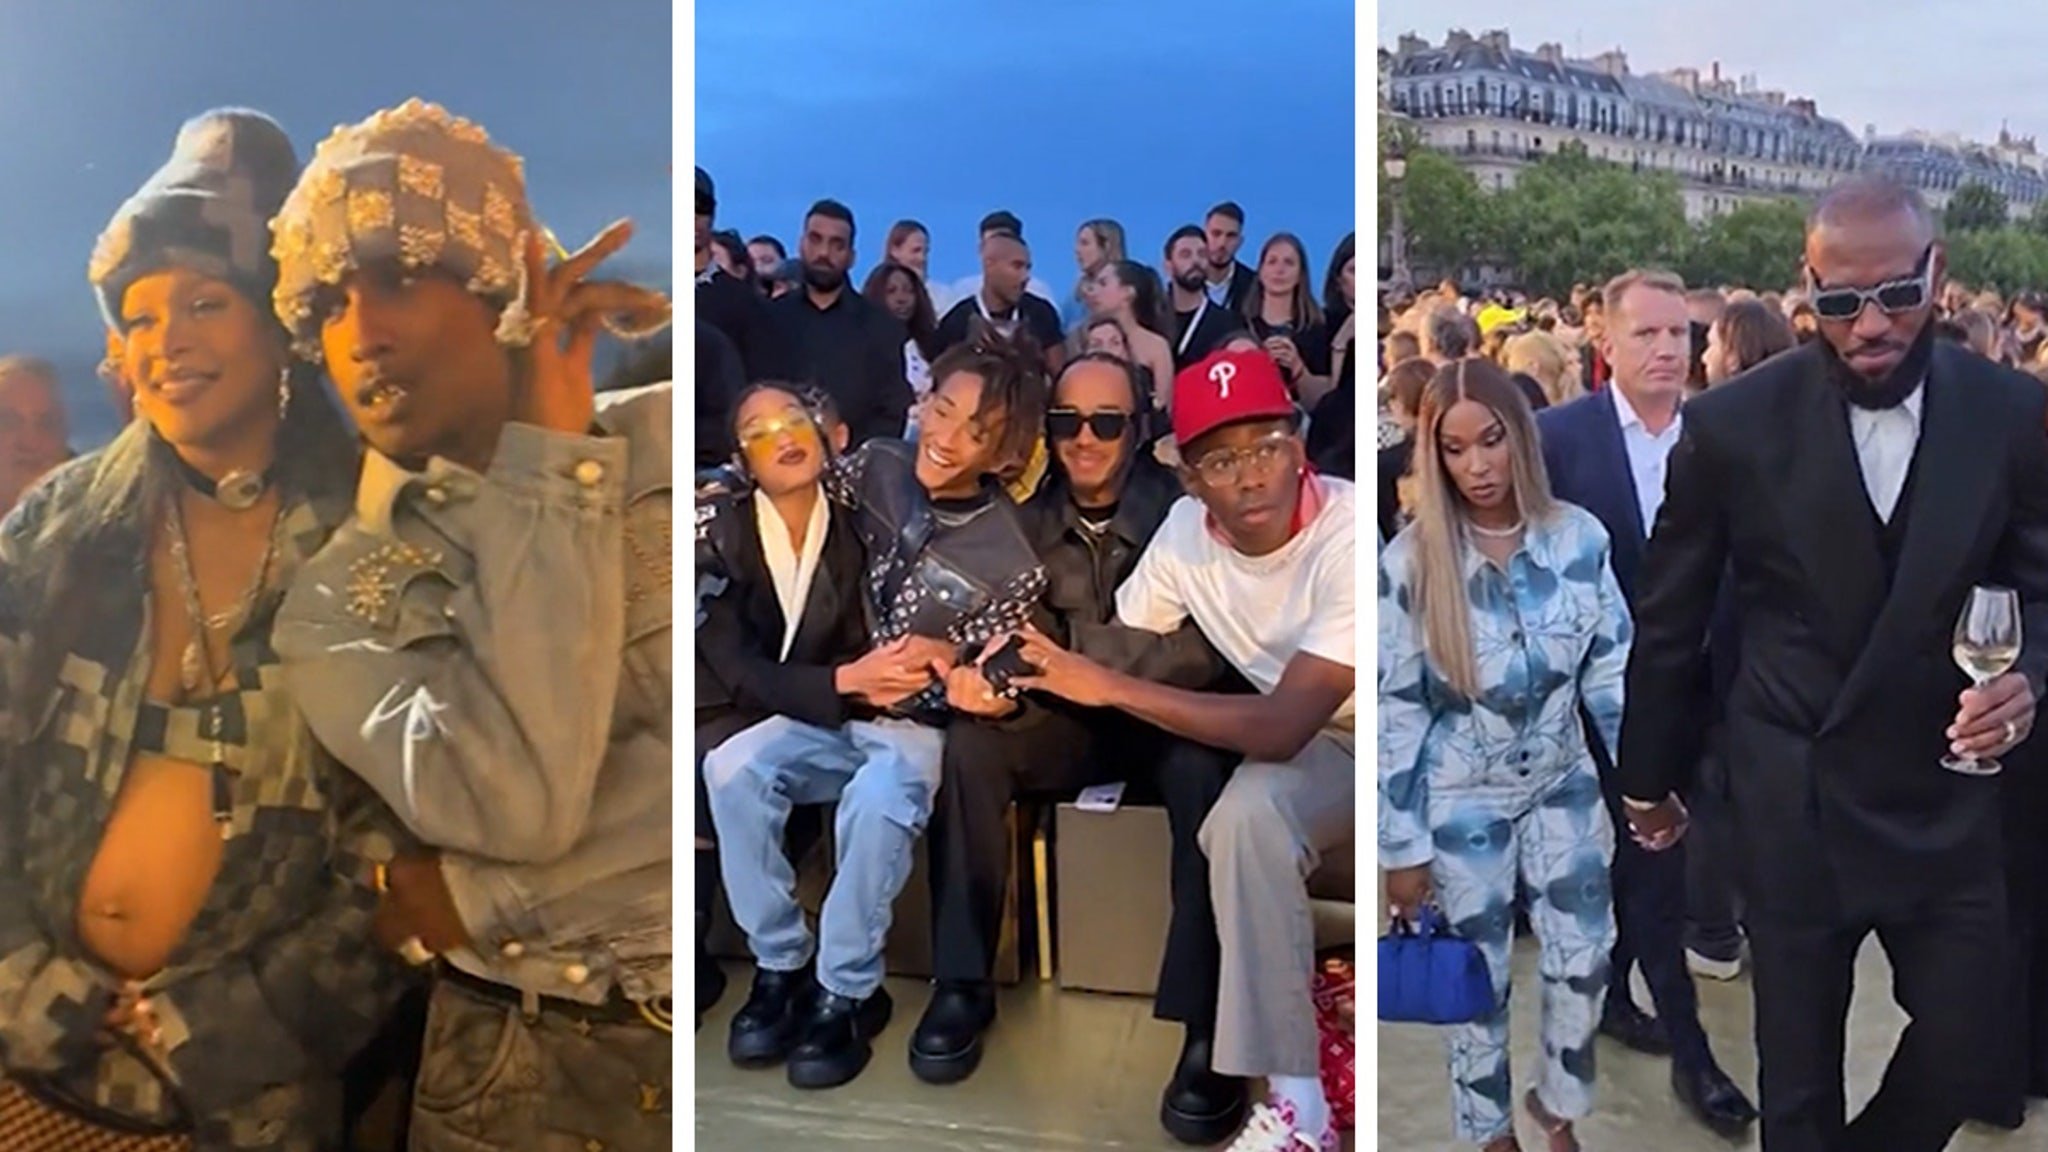 Beyonce, Jay-Z and more celebs shine at Pharrell Williams' Louis